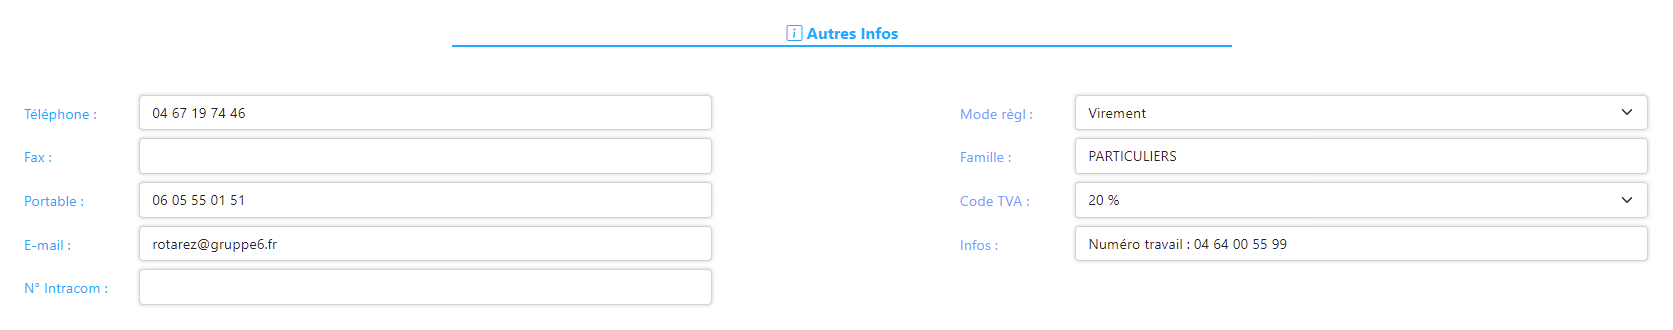 interface-clients-cree-infos